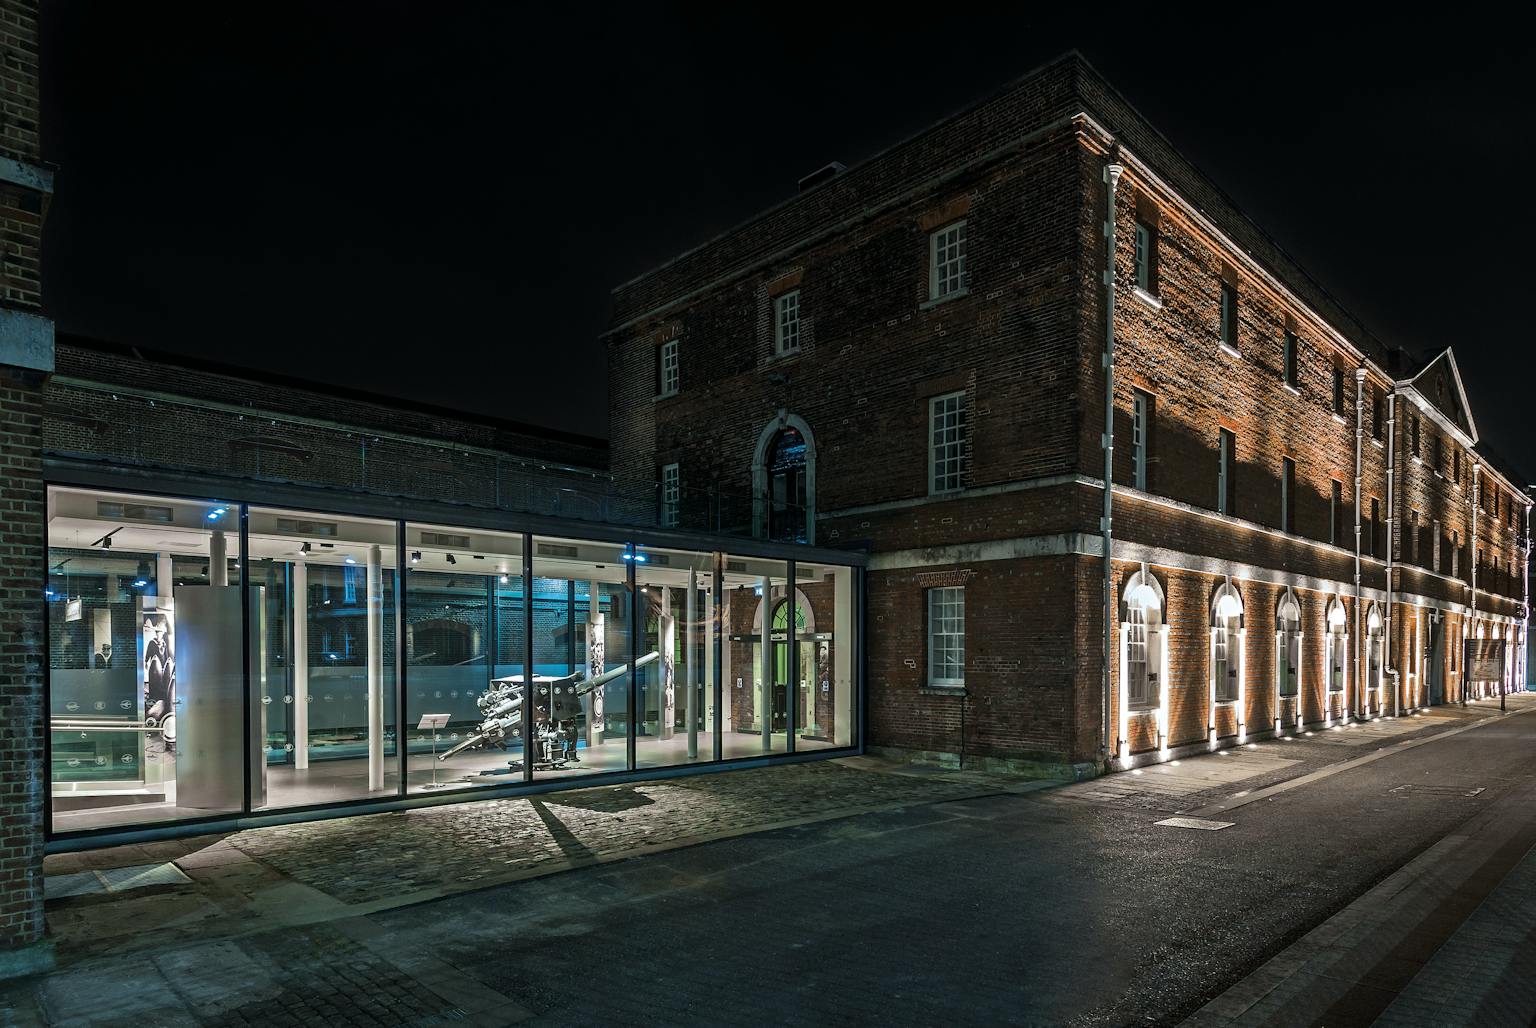 Purcell transformed an 18th Century naval storehouse into a new interactive gallery space as part of the National Museum of the Royal Navy.